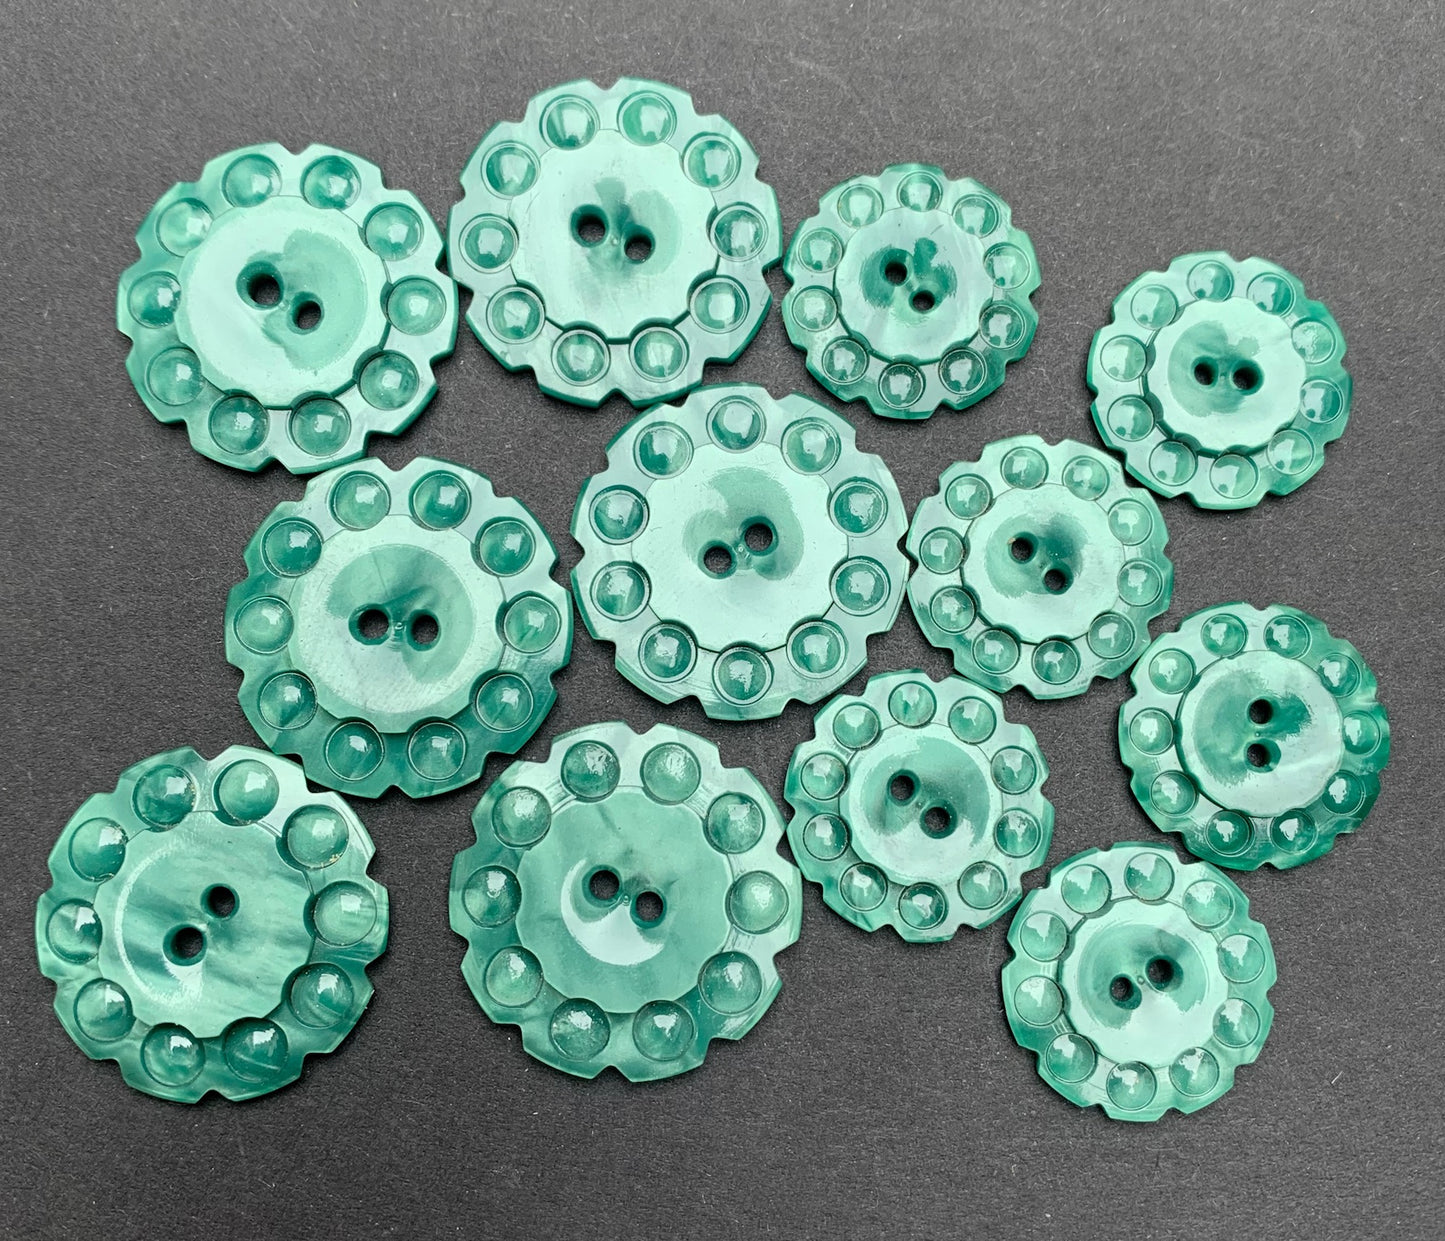 6 Silvery Green Vintage 1940s French  Buttons - 2.2cm or 1.7cm